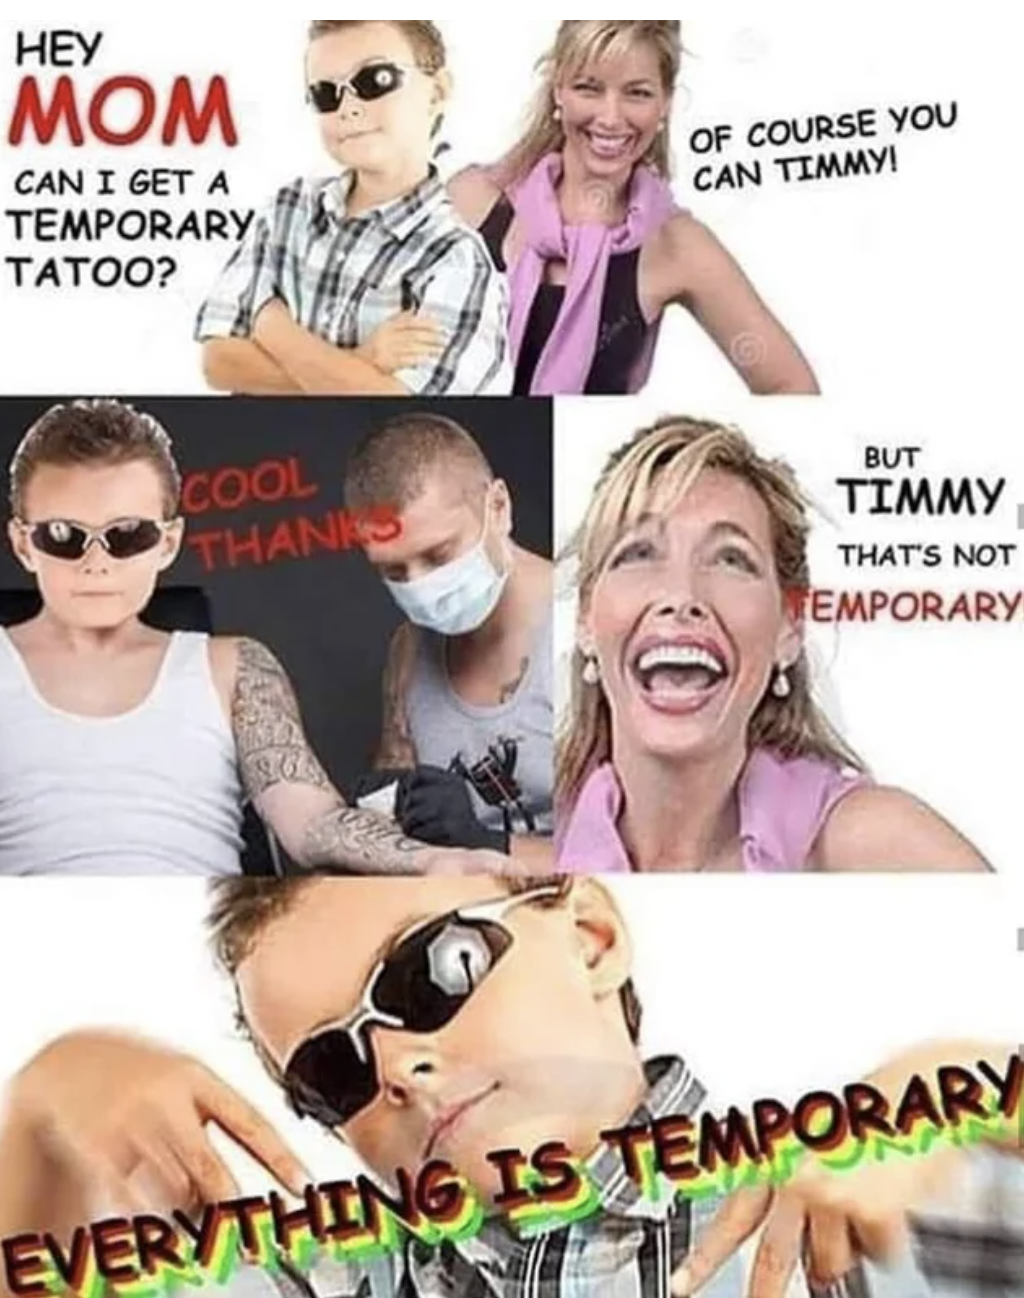 Cringey pics - everything is temporary meme - Hey Mom Can I Get A Temporary Tatoo? Cool Thanks Of Course You Can Timmy! But Timmy That'S Not Emporary Everything Is Temporary